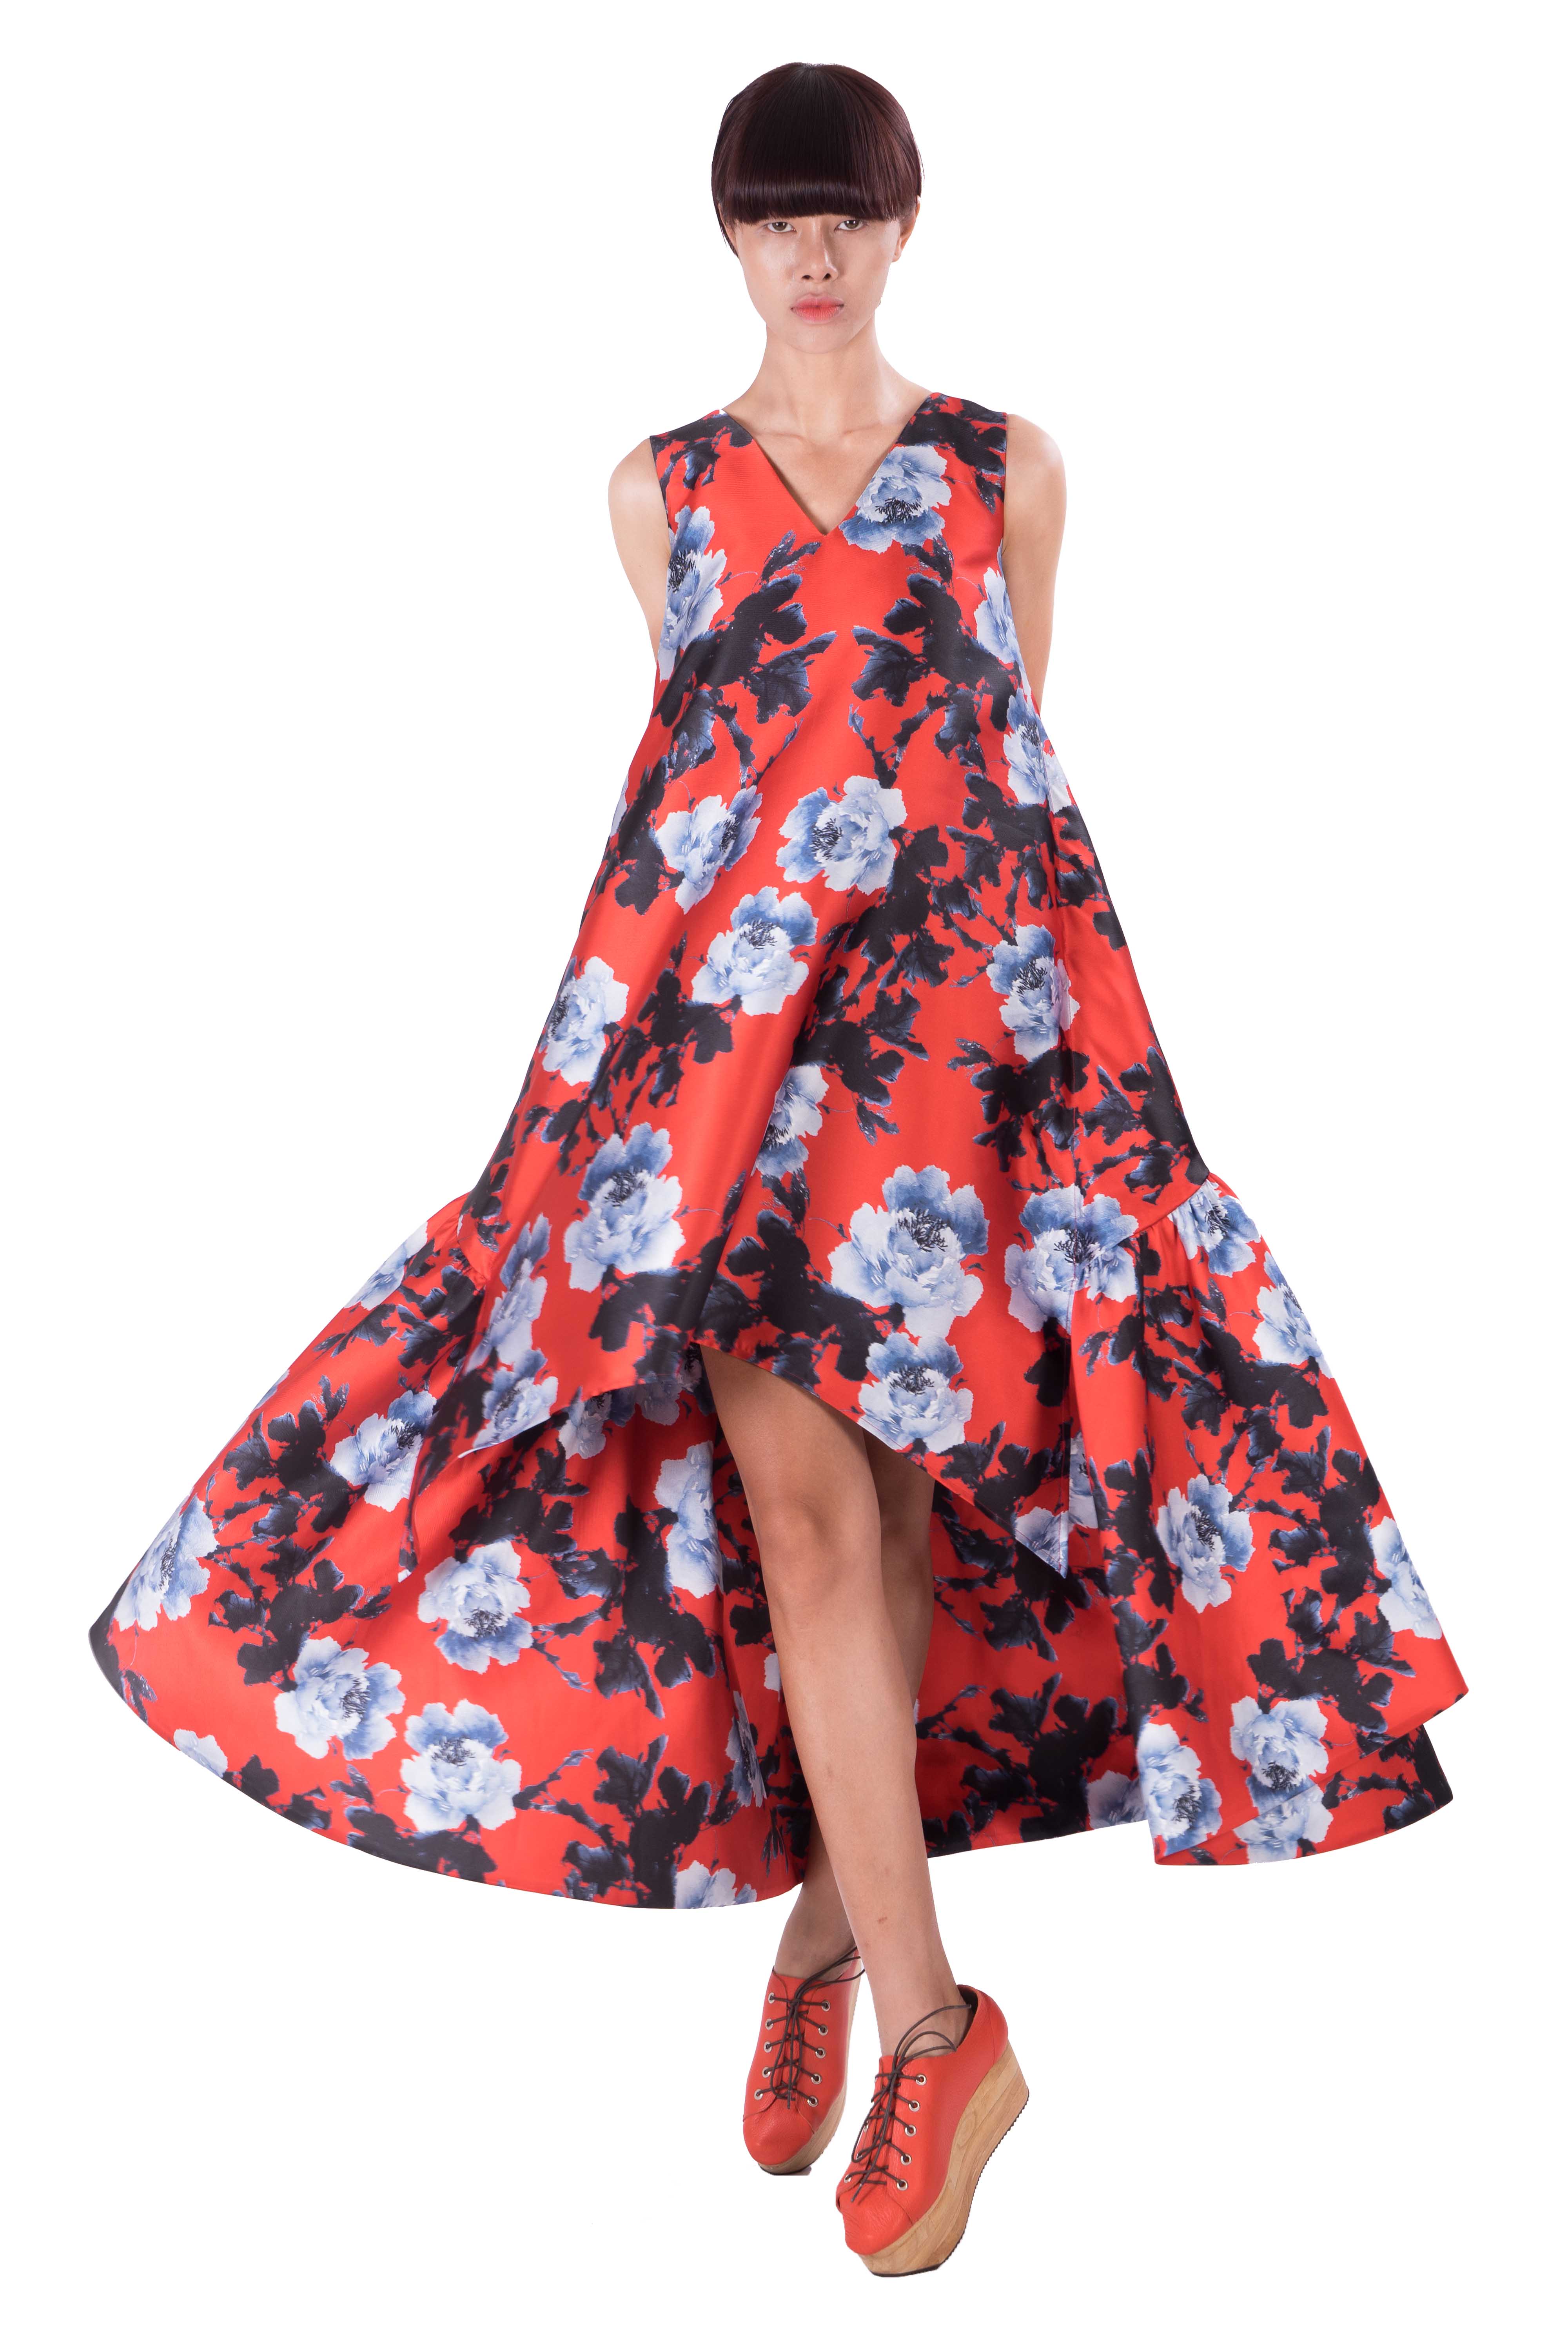 Red taffeta dress with white, grey and black flowers 2